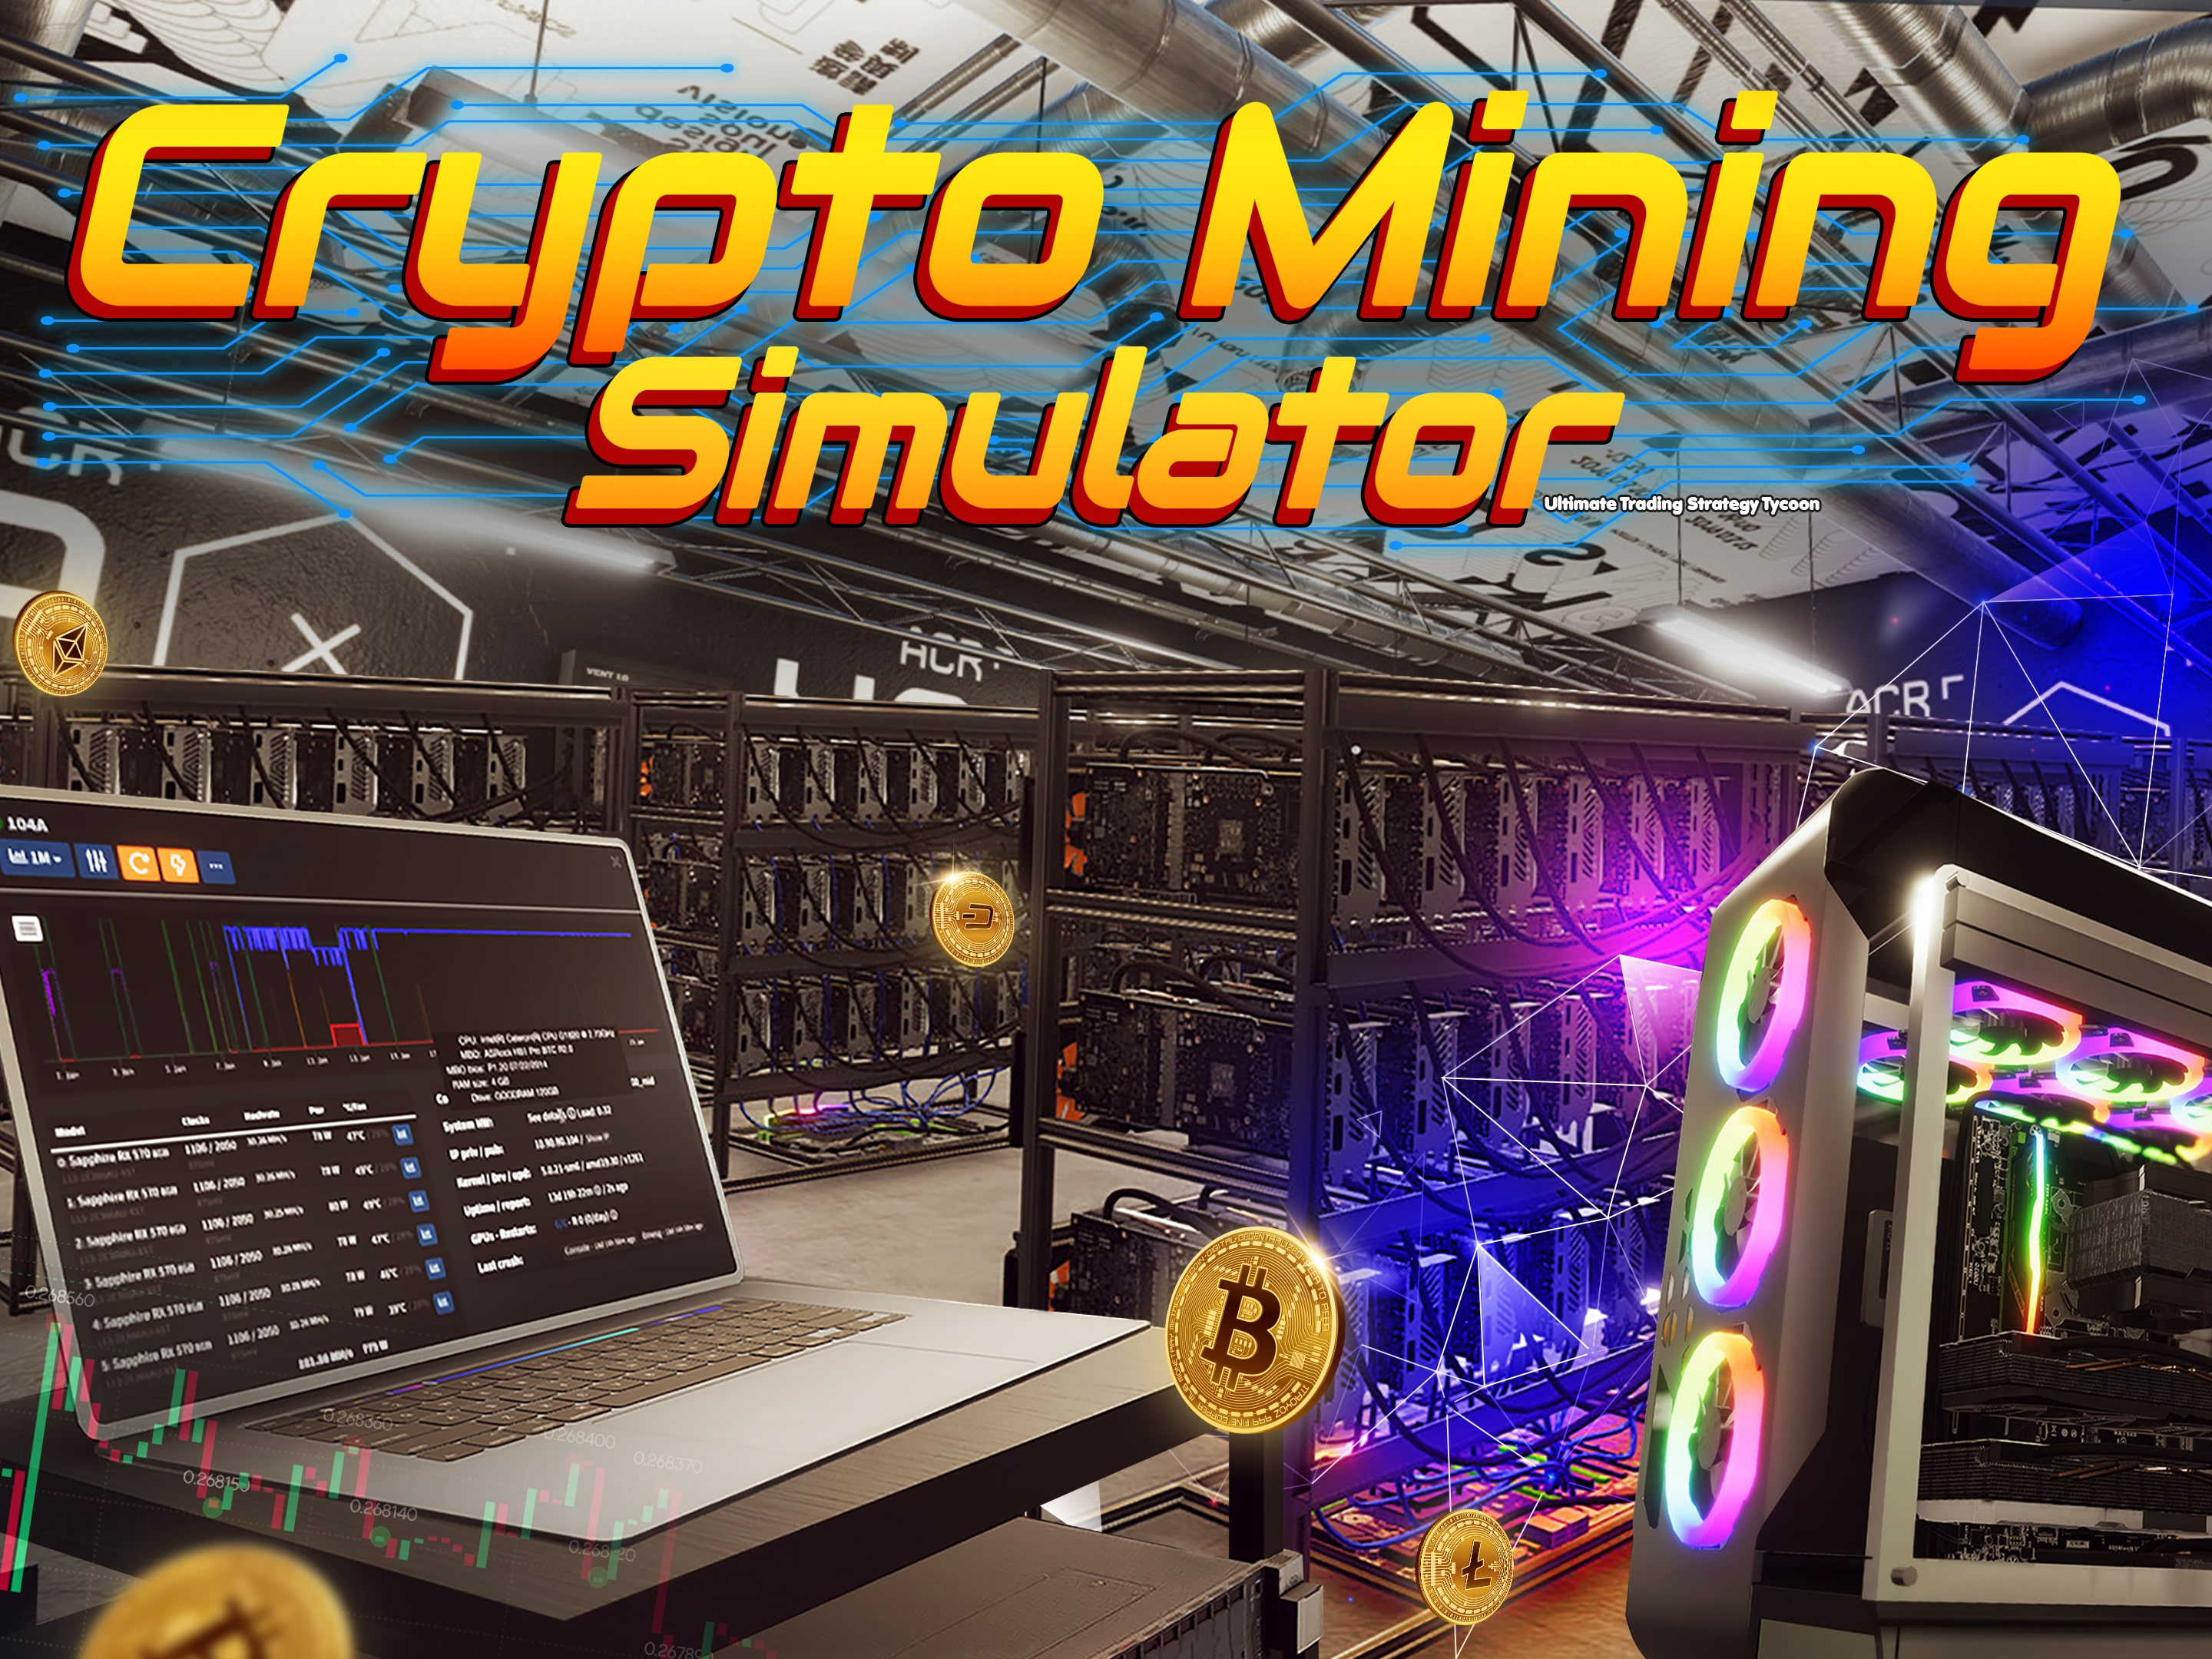 Steam Community :: Bitcoin Tycoon - Mining Simulation Game